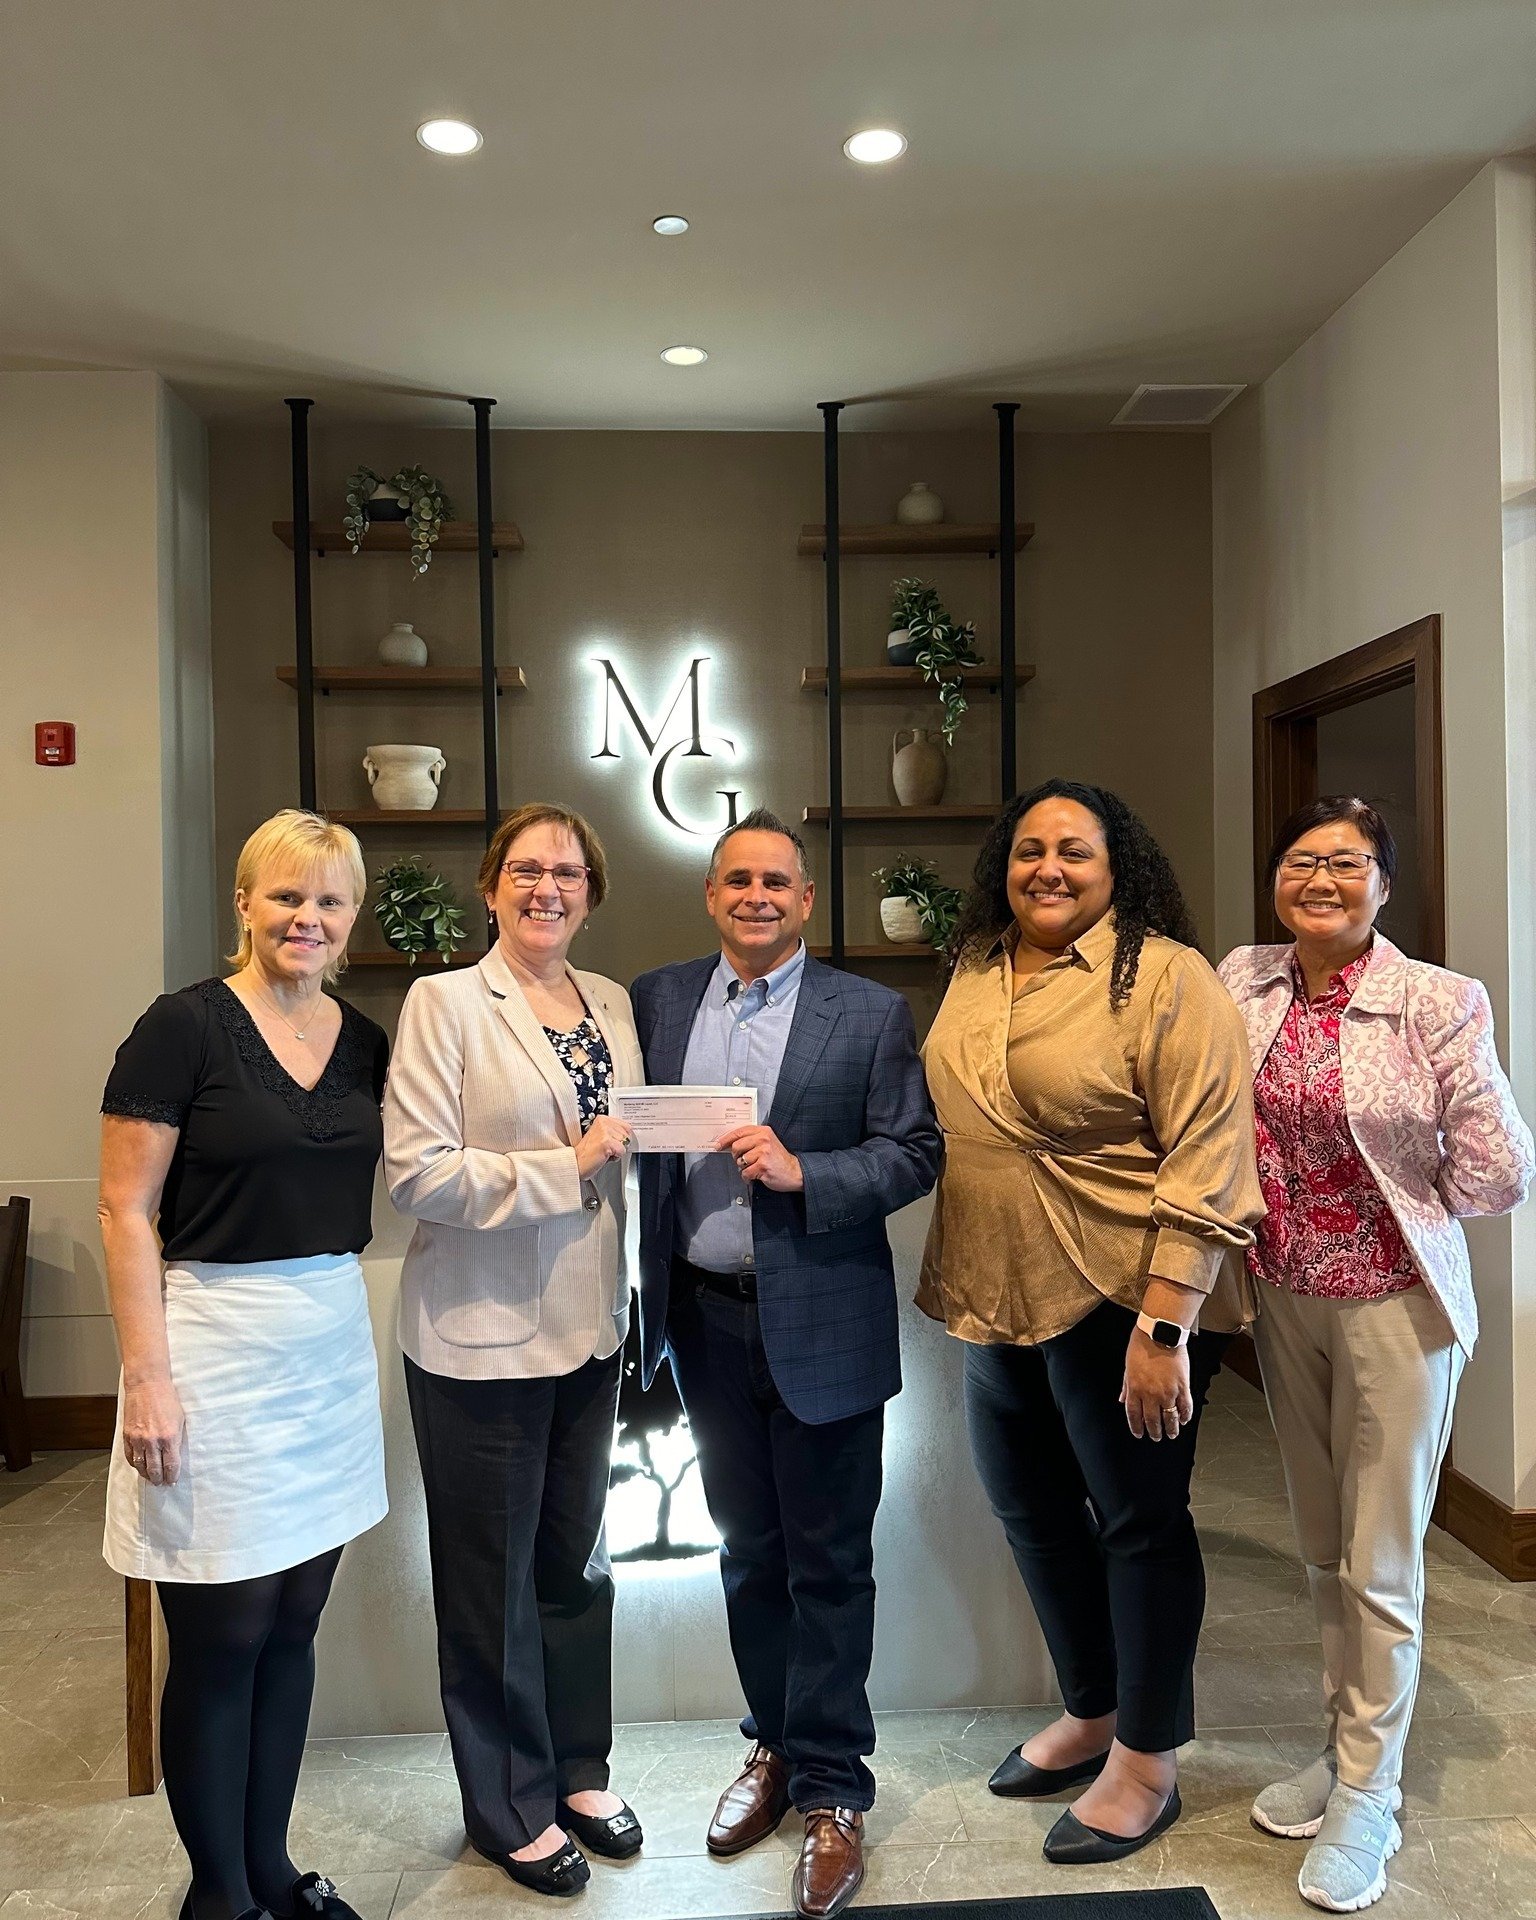 We were so thrilled to be able to finally present a check to @oaks_integrated_care from our opening party! Thank you to everyone who donated, and to this amazing organization for all they do for our community. 

(From left to right: Marianne Aleardi 